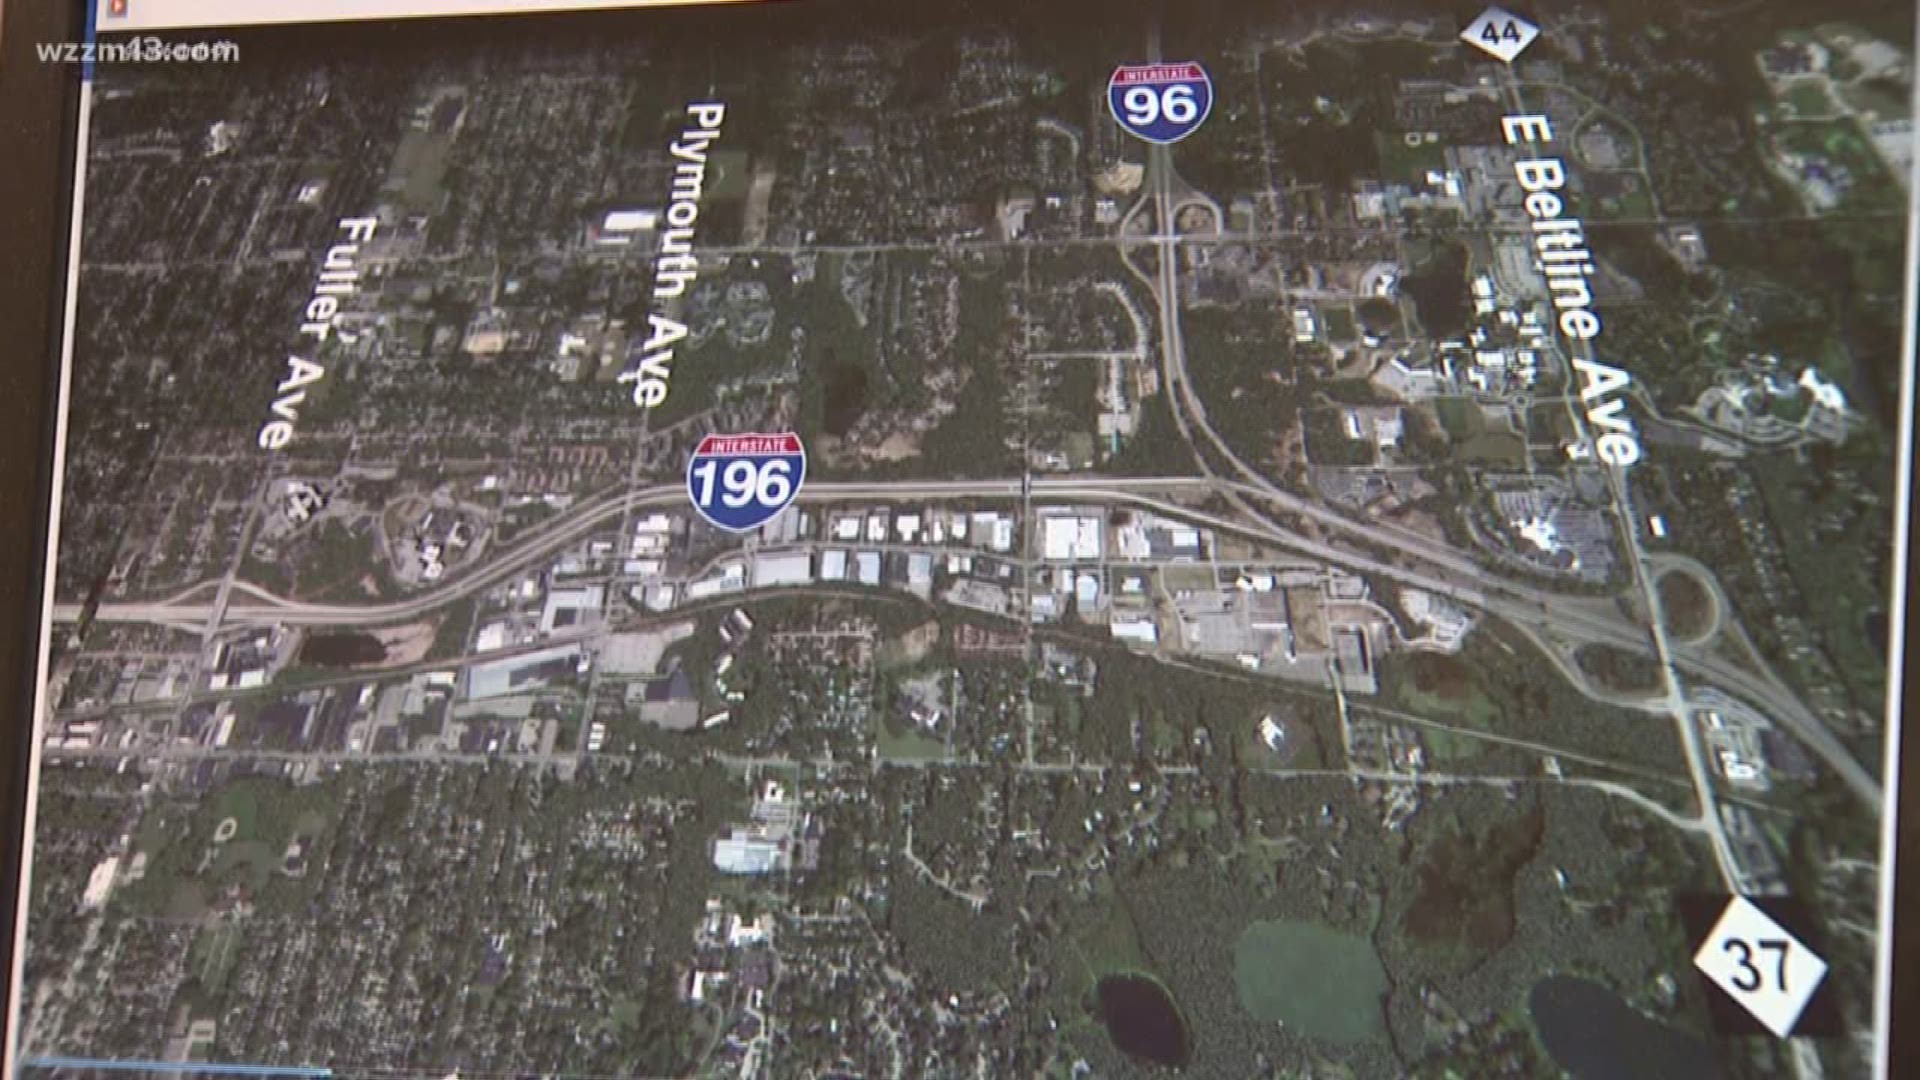 Changes coming to I-196 and I-96 interchange